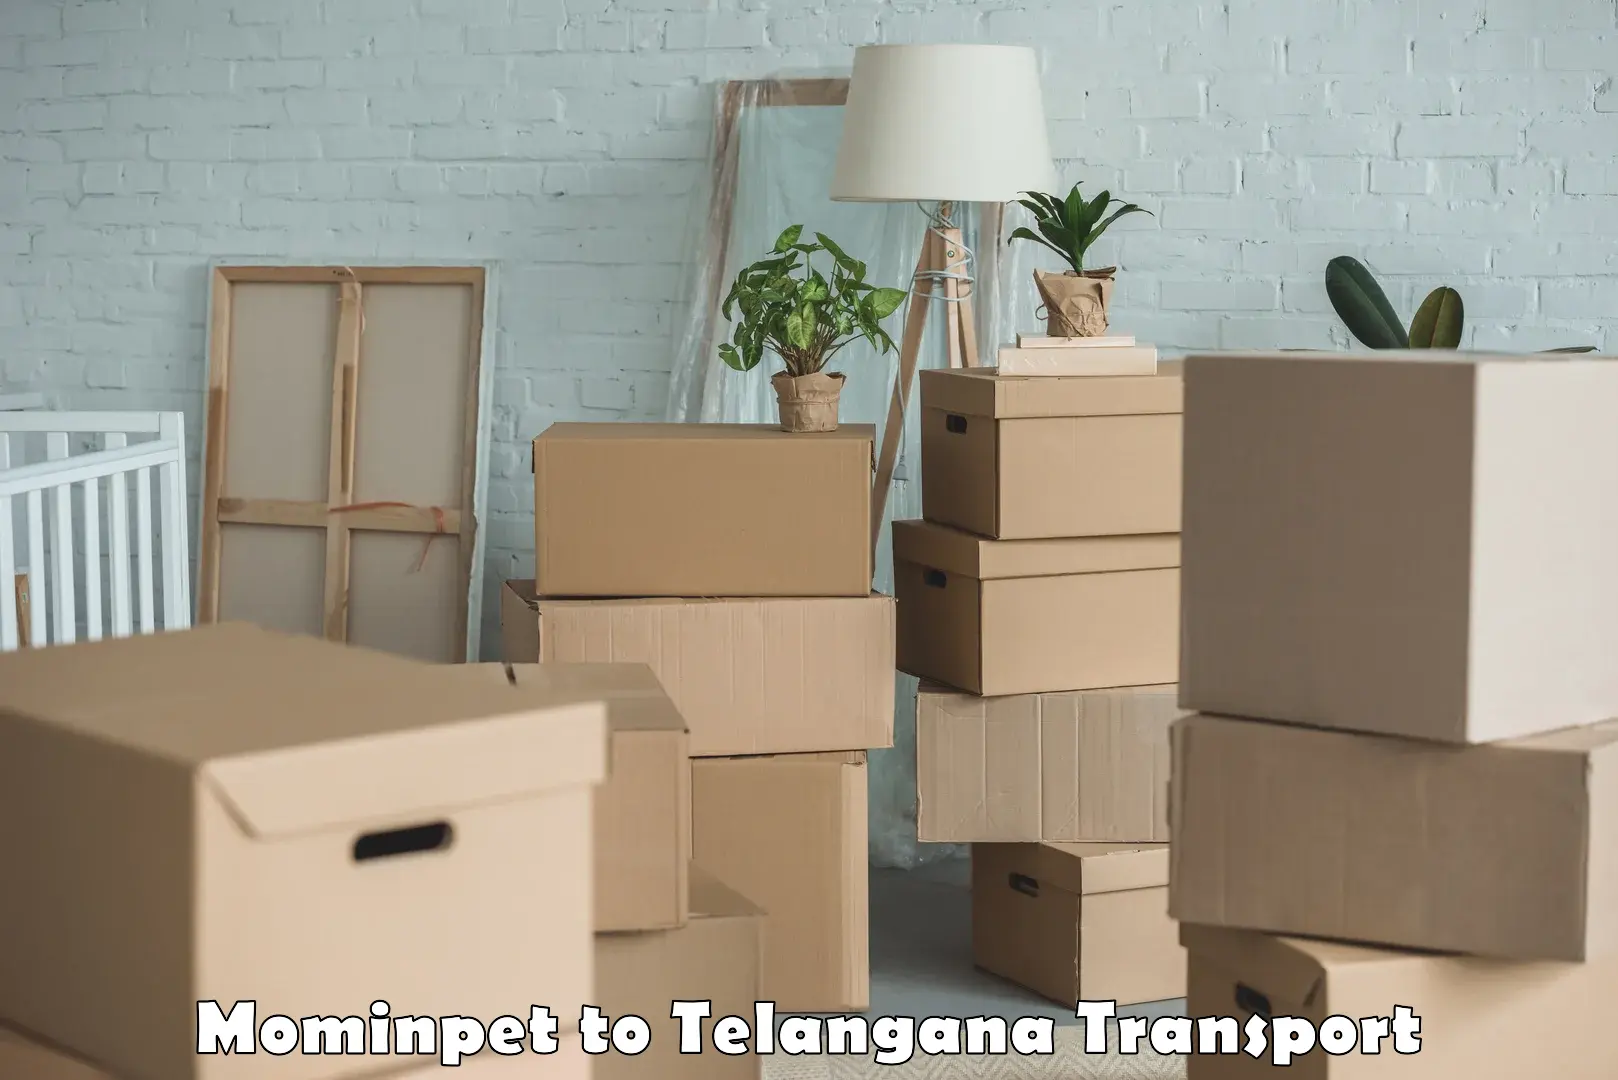 Goods delivery service Mominpet to Bellampalli